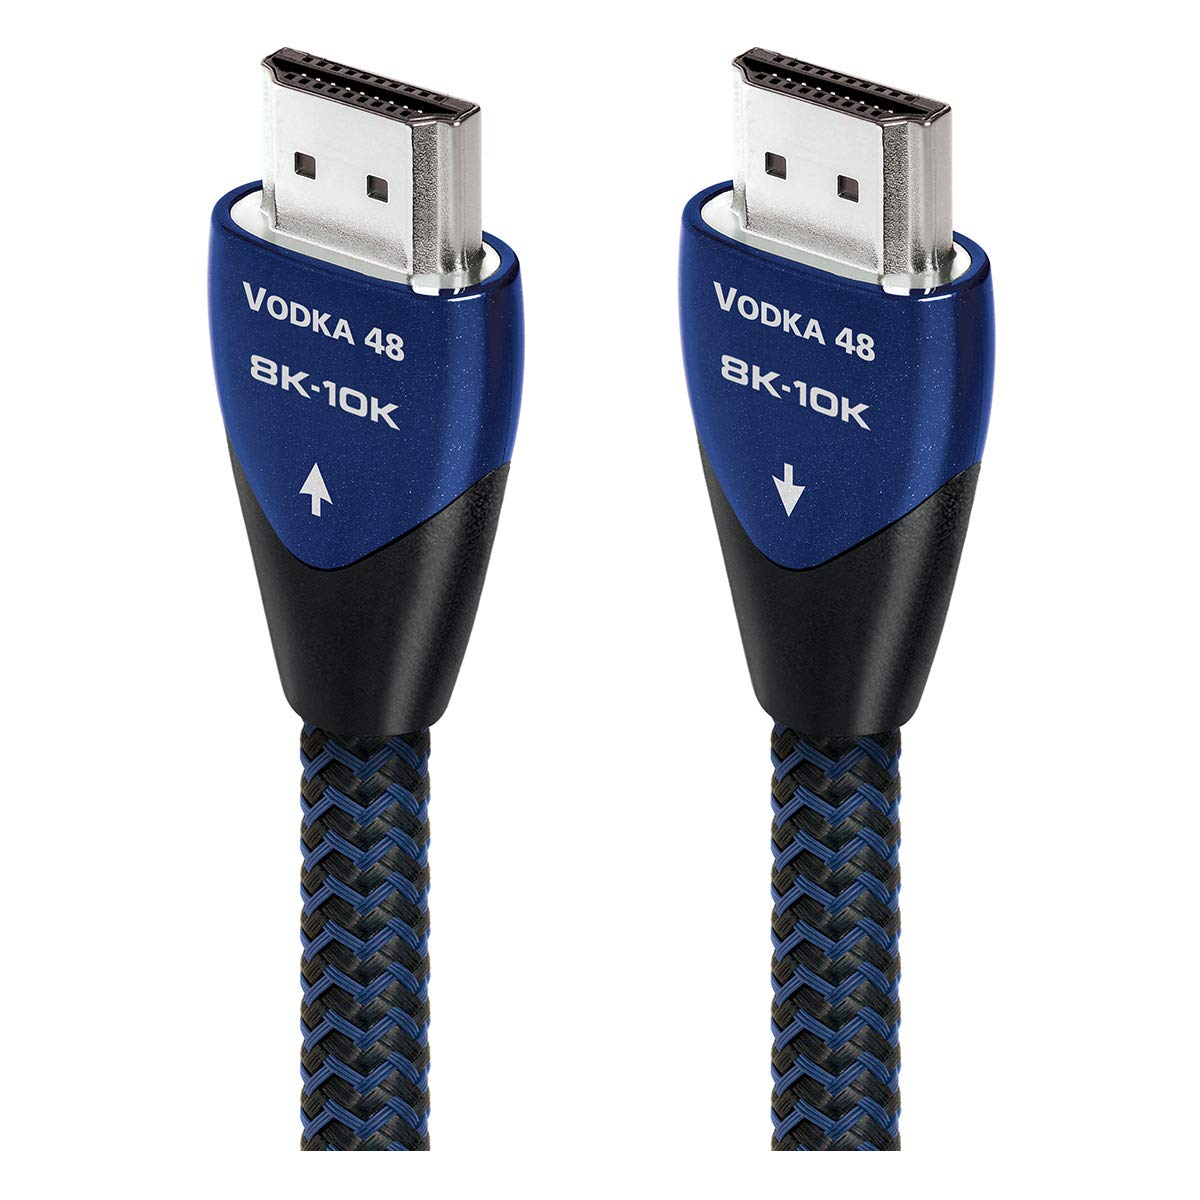 AudioQuest Vodka 48 8K-10K 48Gbps HDMI Cable